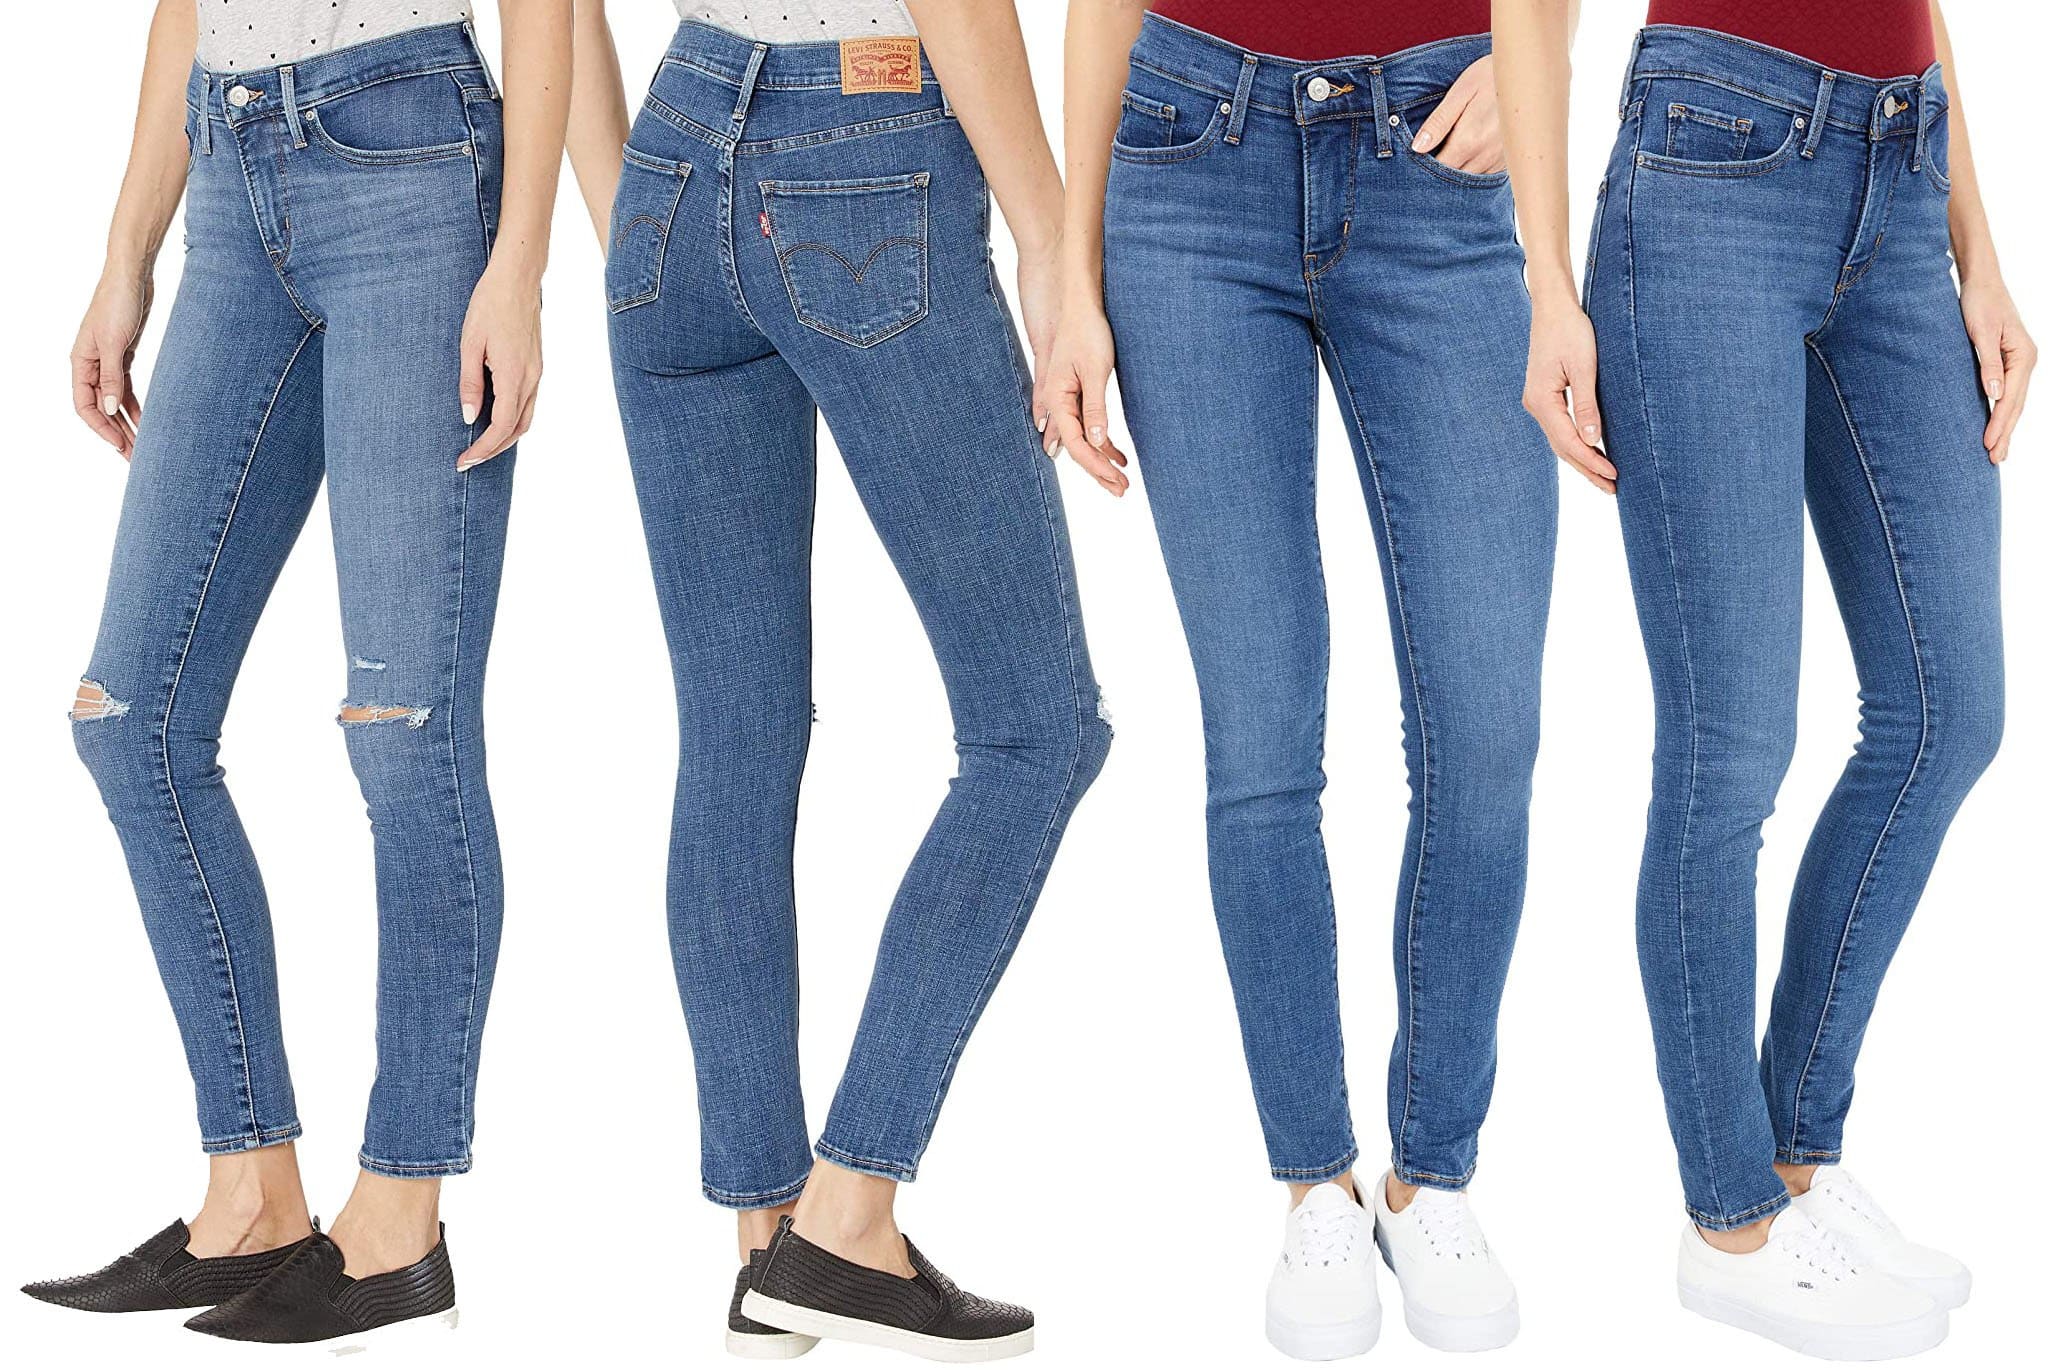 The 311 Shaping Skinny five-pocket jean creates a leg-lengthening silhouette, thanks to the mid-rise and sleek skinny fit